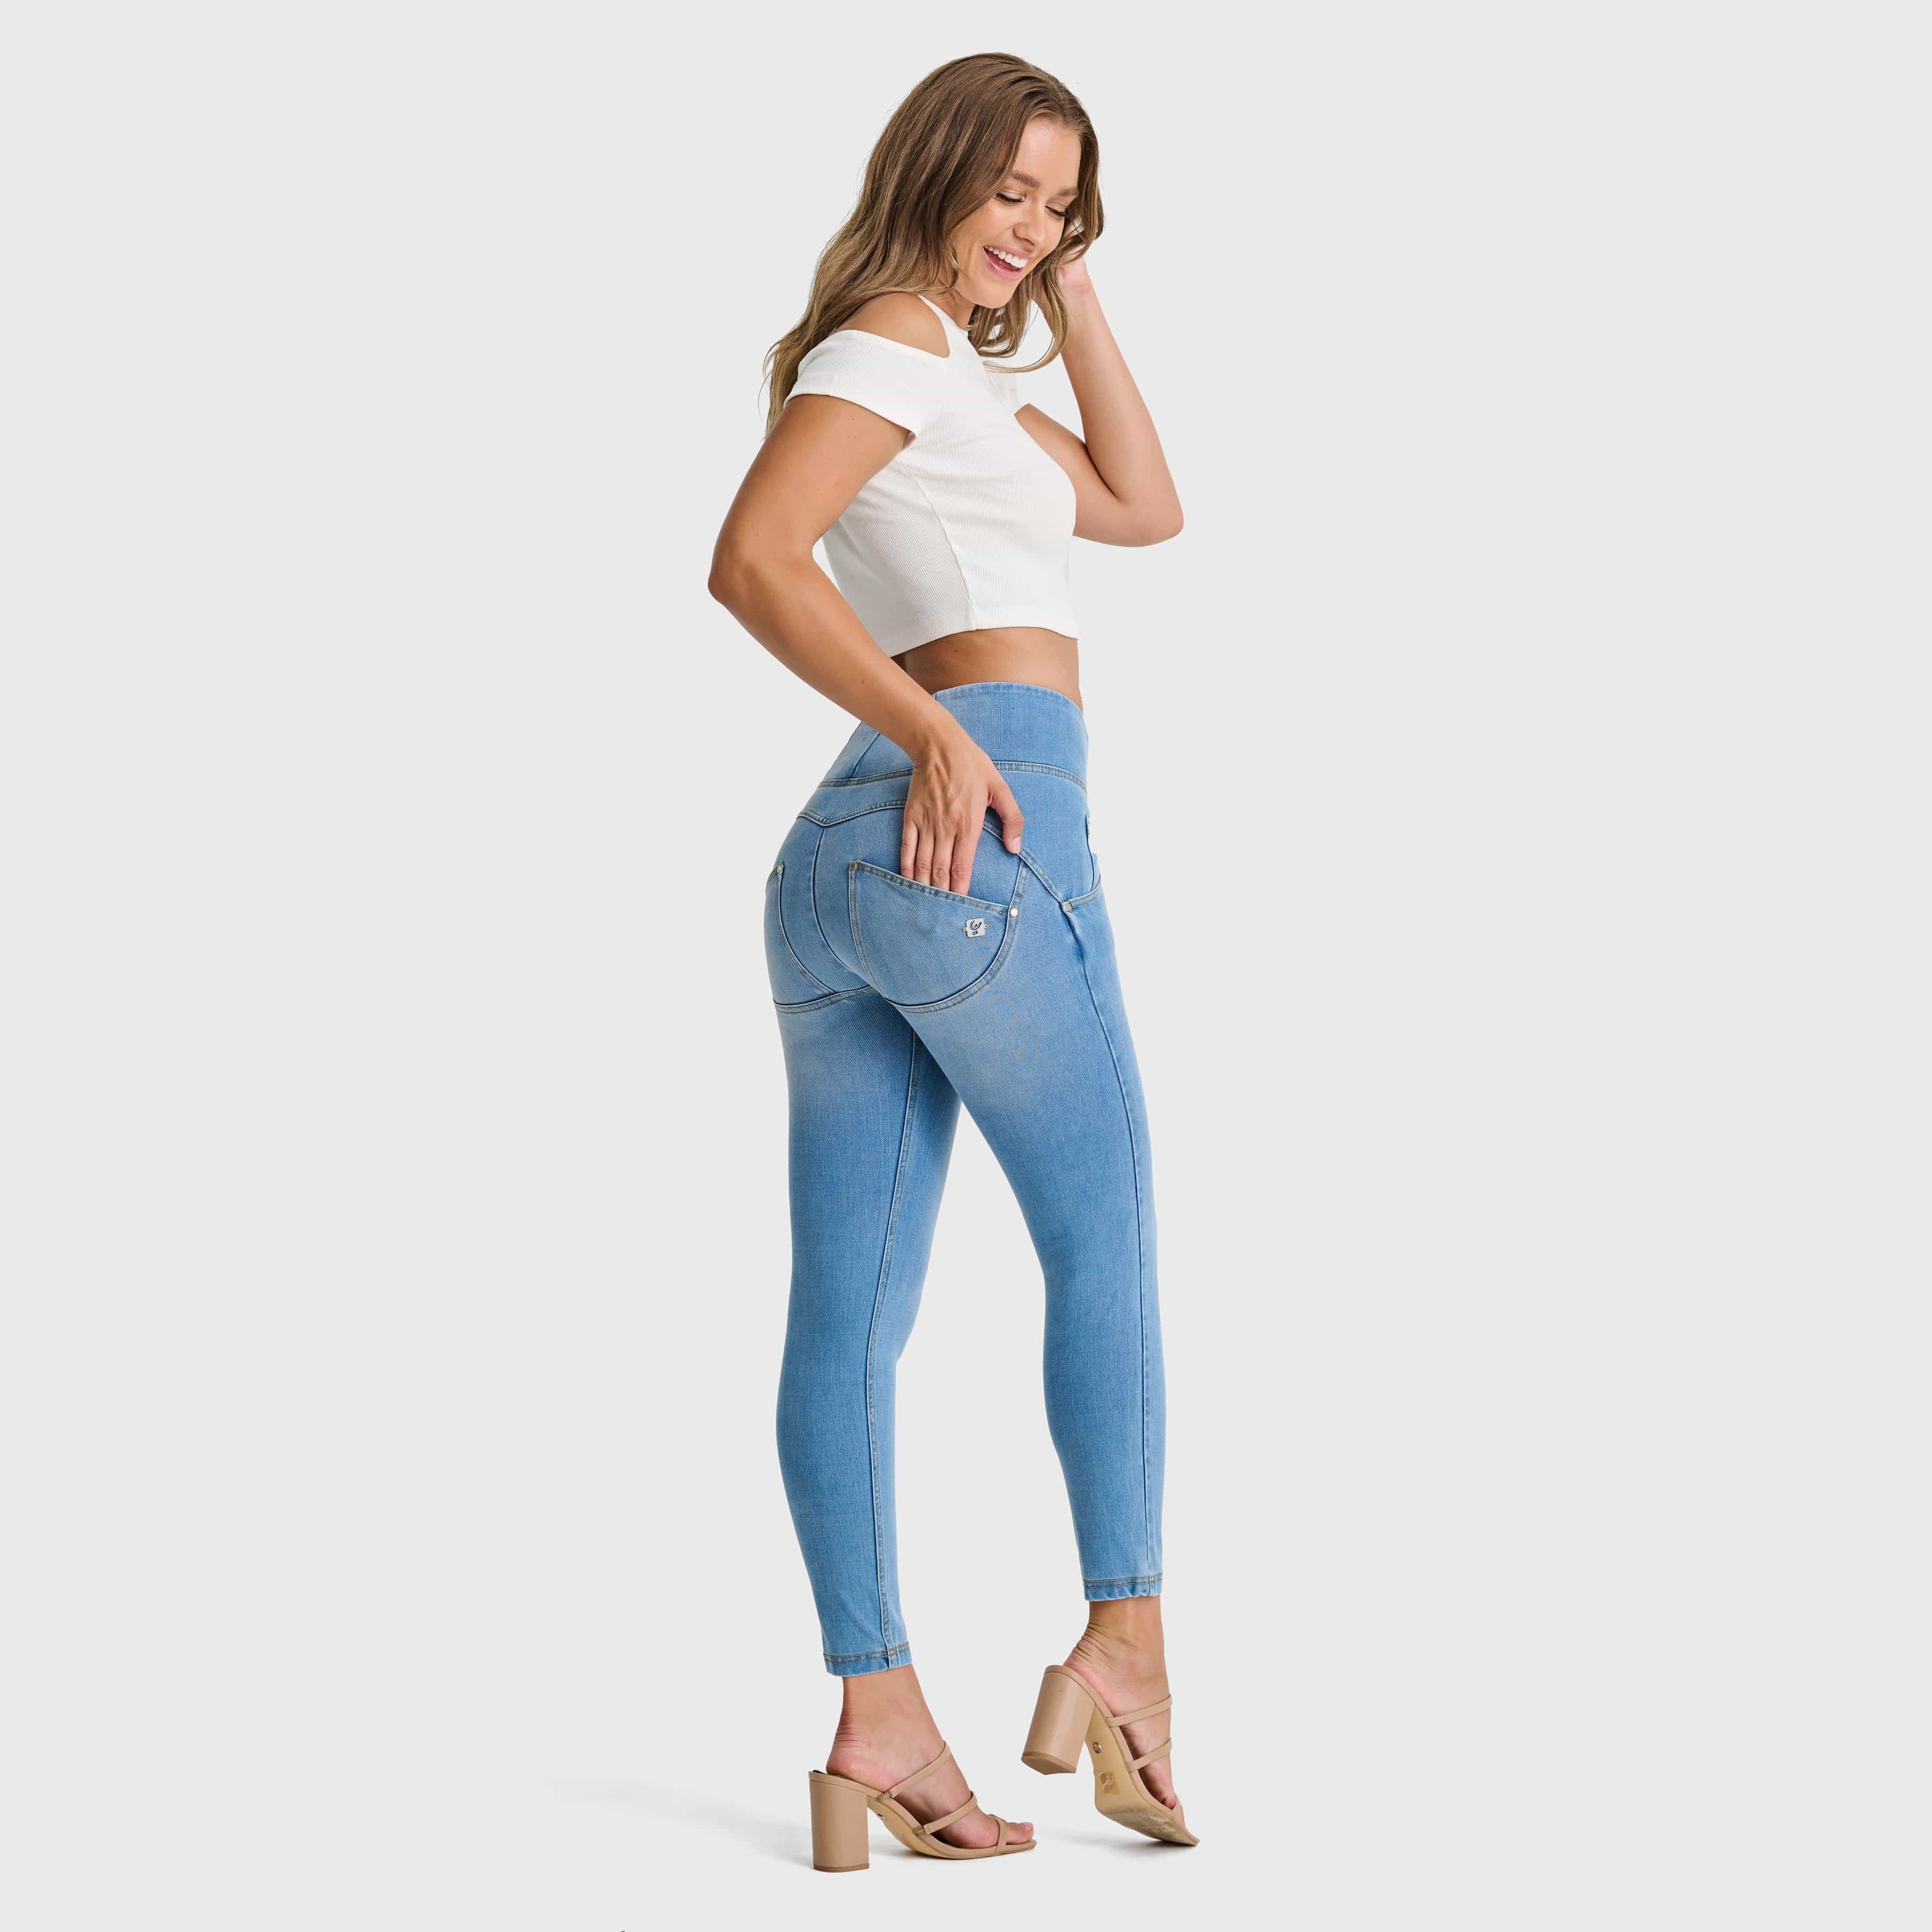 WR.UP® SNUG Jeans - High Waisted - Petite Length - Light Blue + Yellow Stitching 2